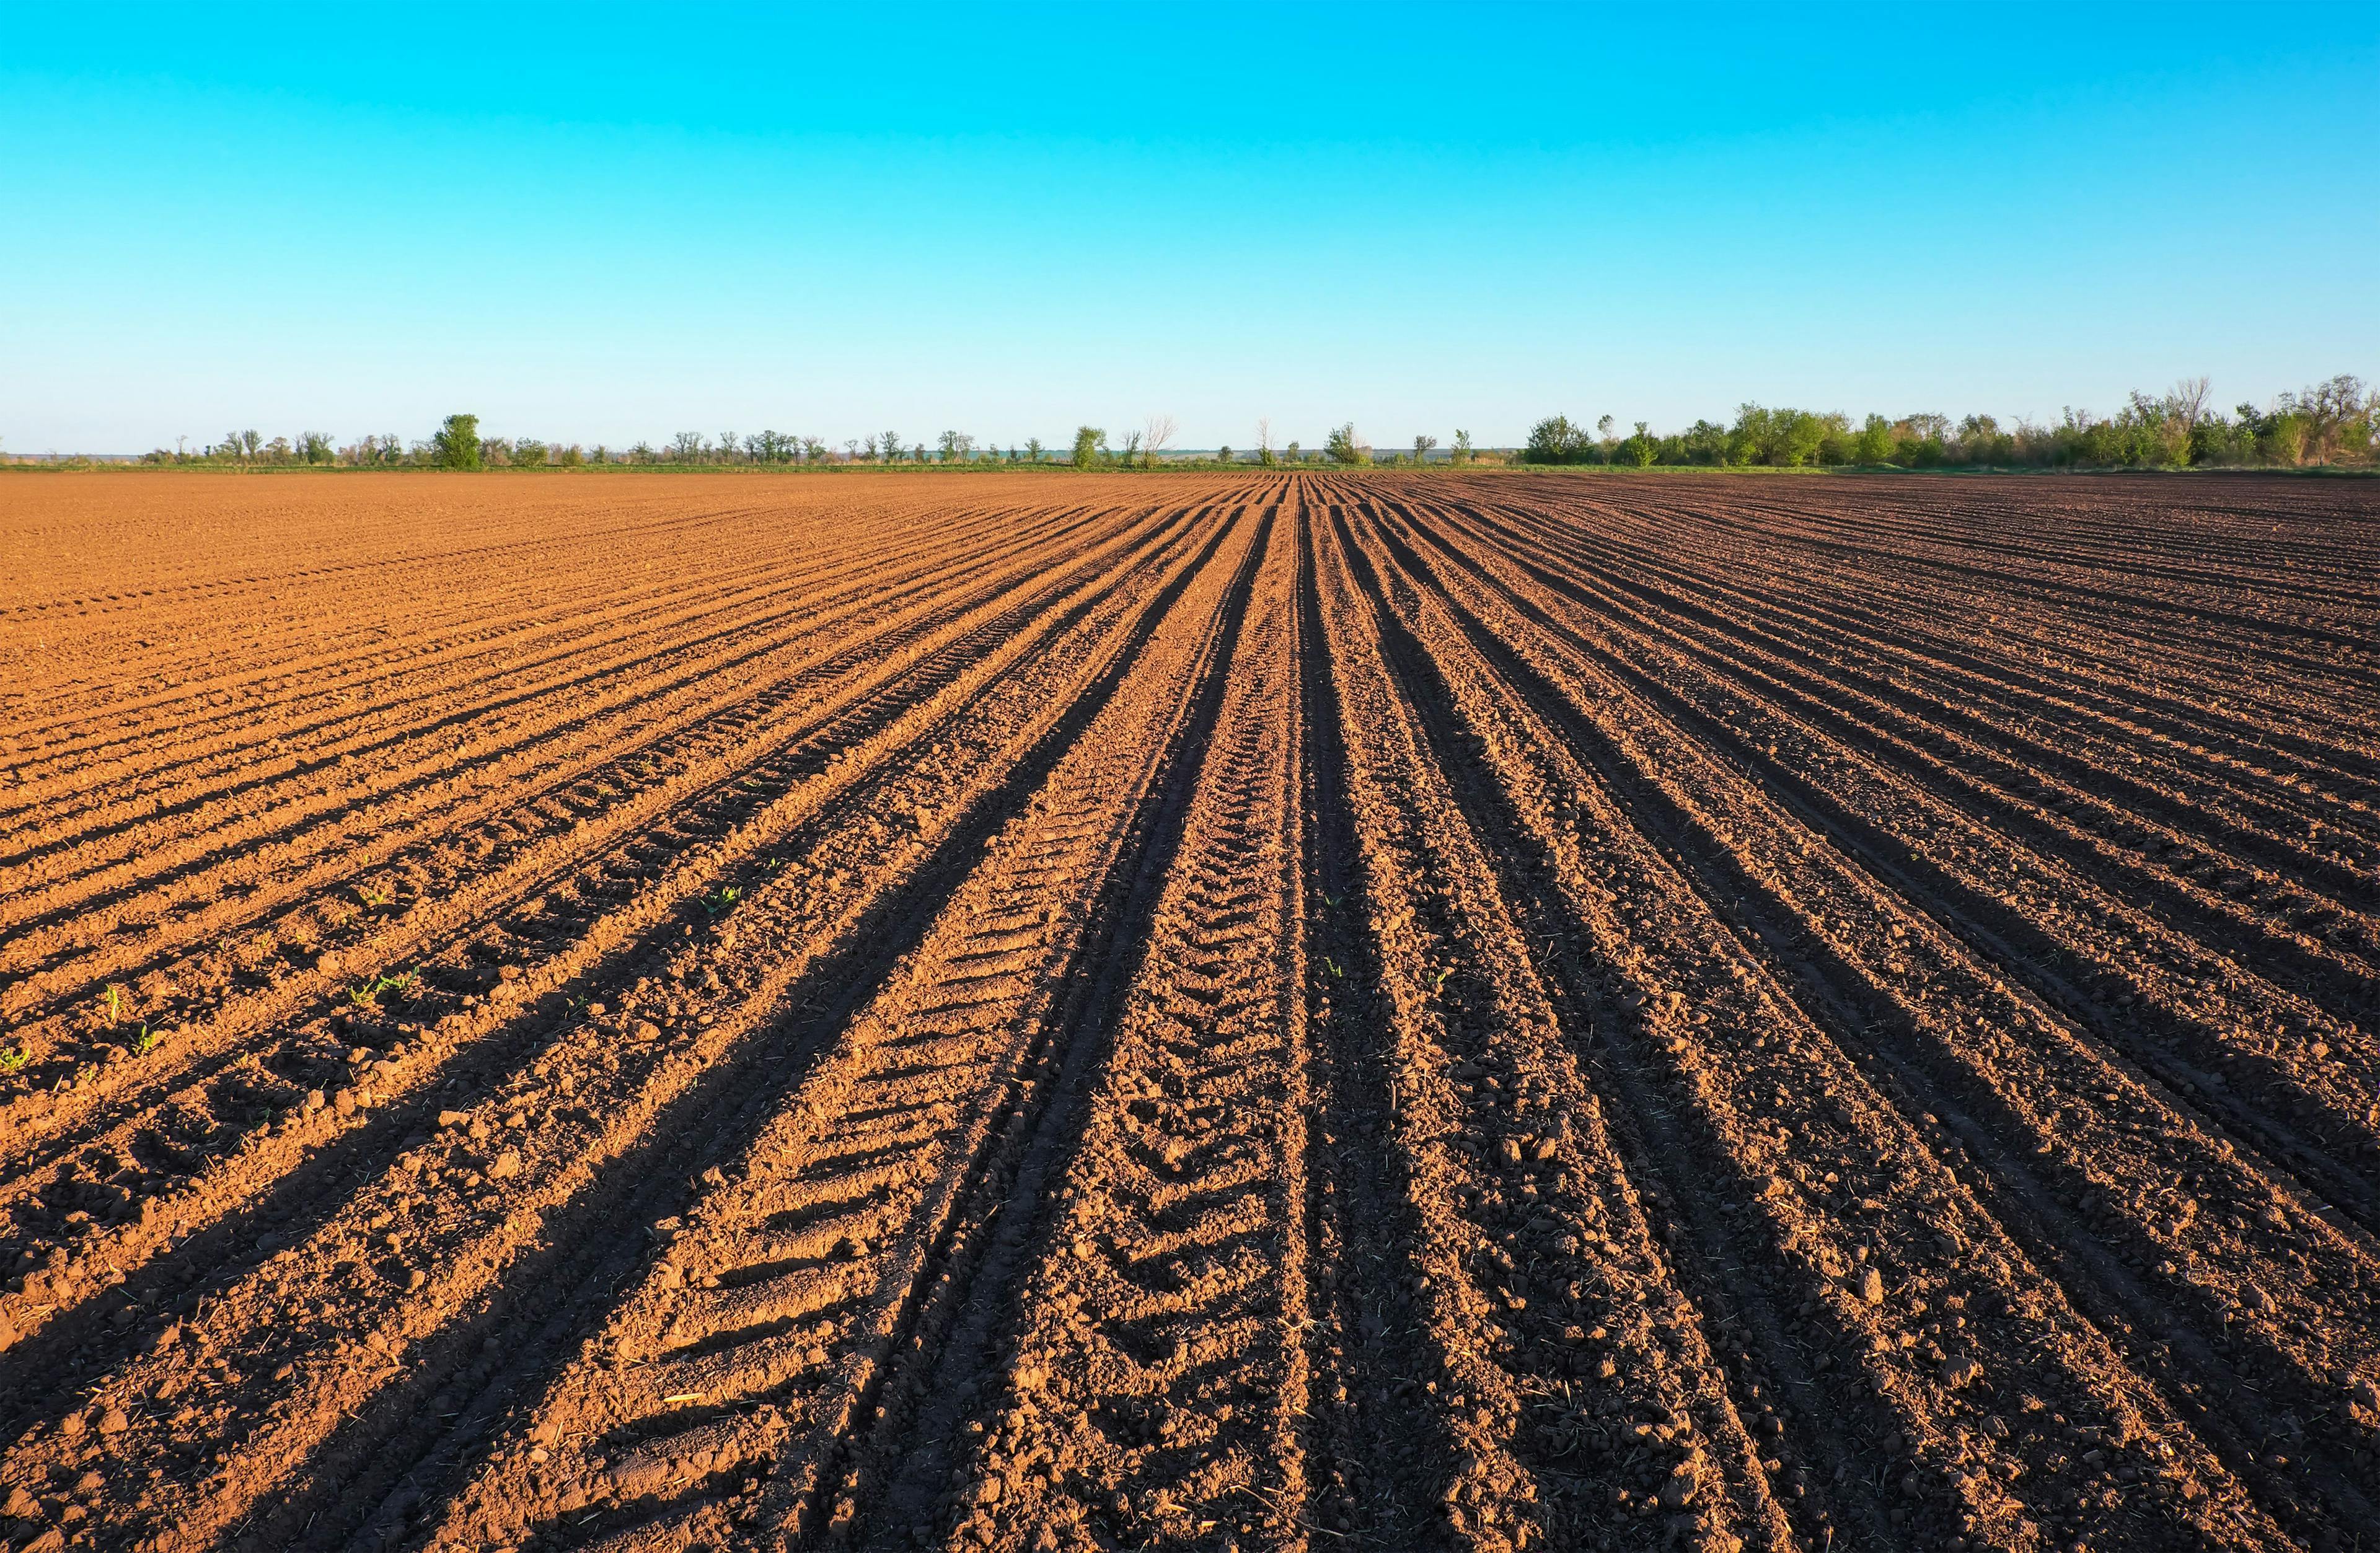 Preparing field for planting. Plowed soil in spring time with blue sky. | Image Credit: © es0lex